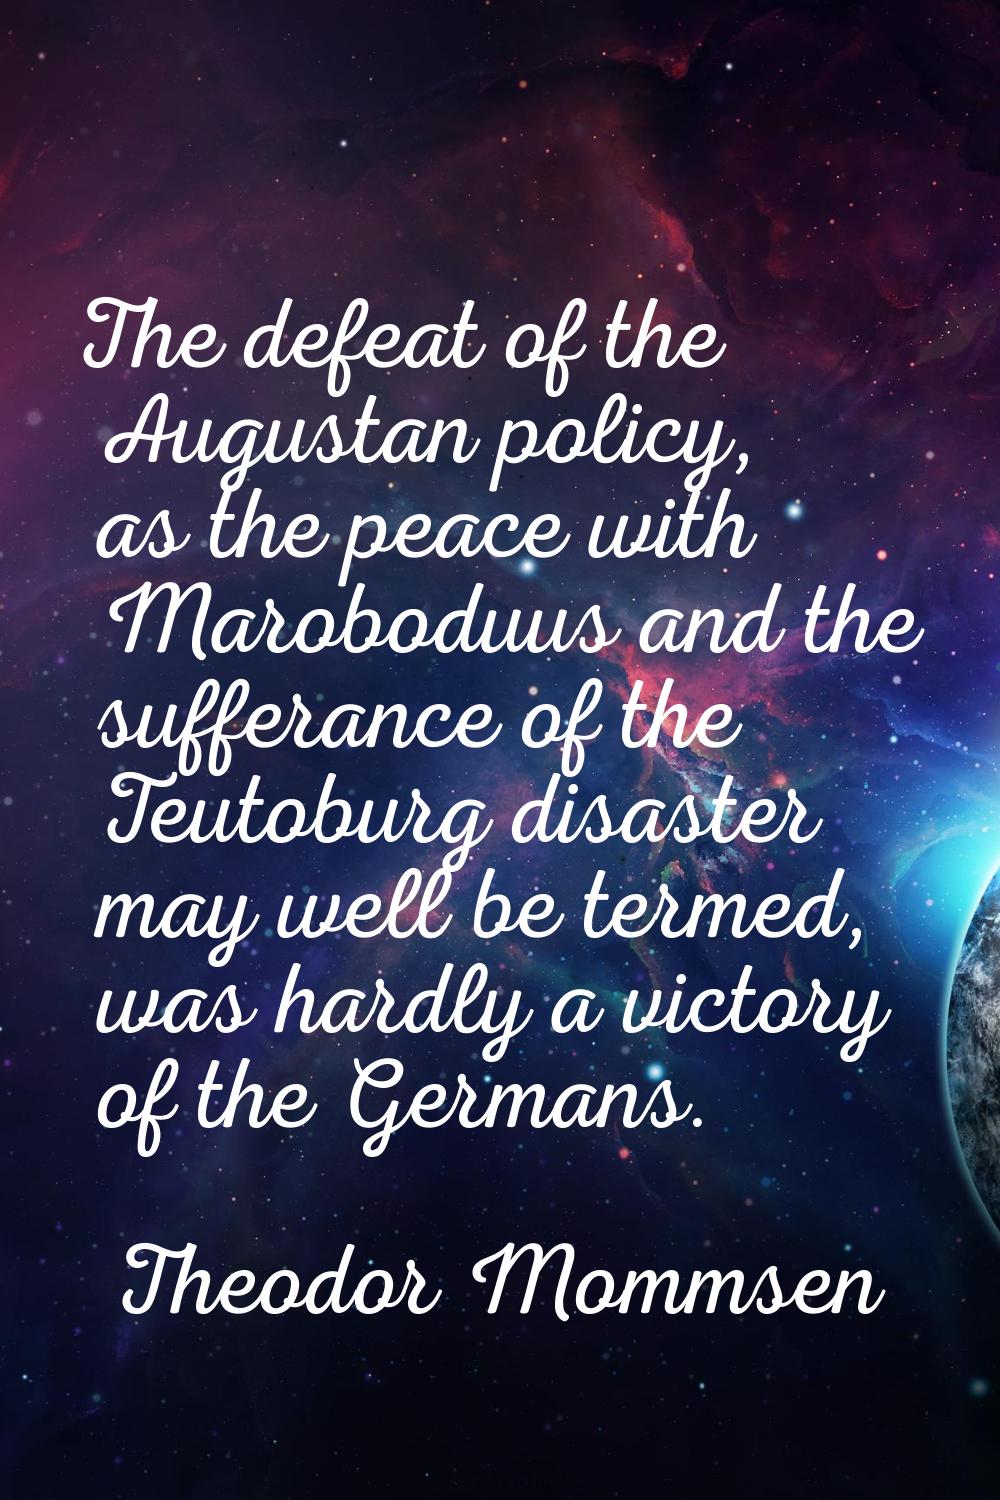 The defeat of the Augustan policy, as the peace with Maroboduus and the sufferance of the Teutoburg